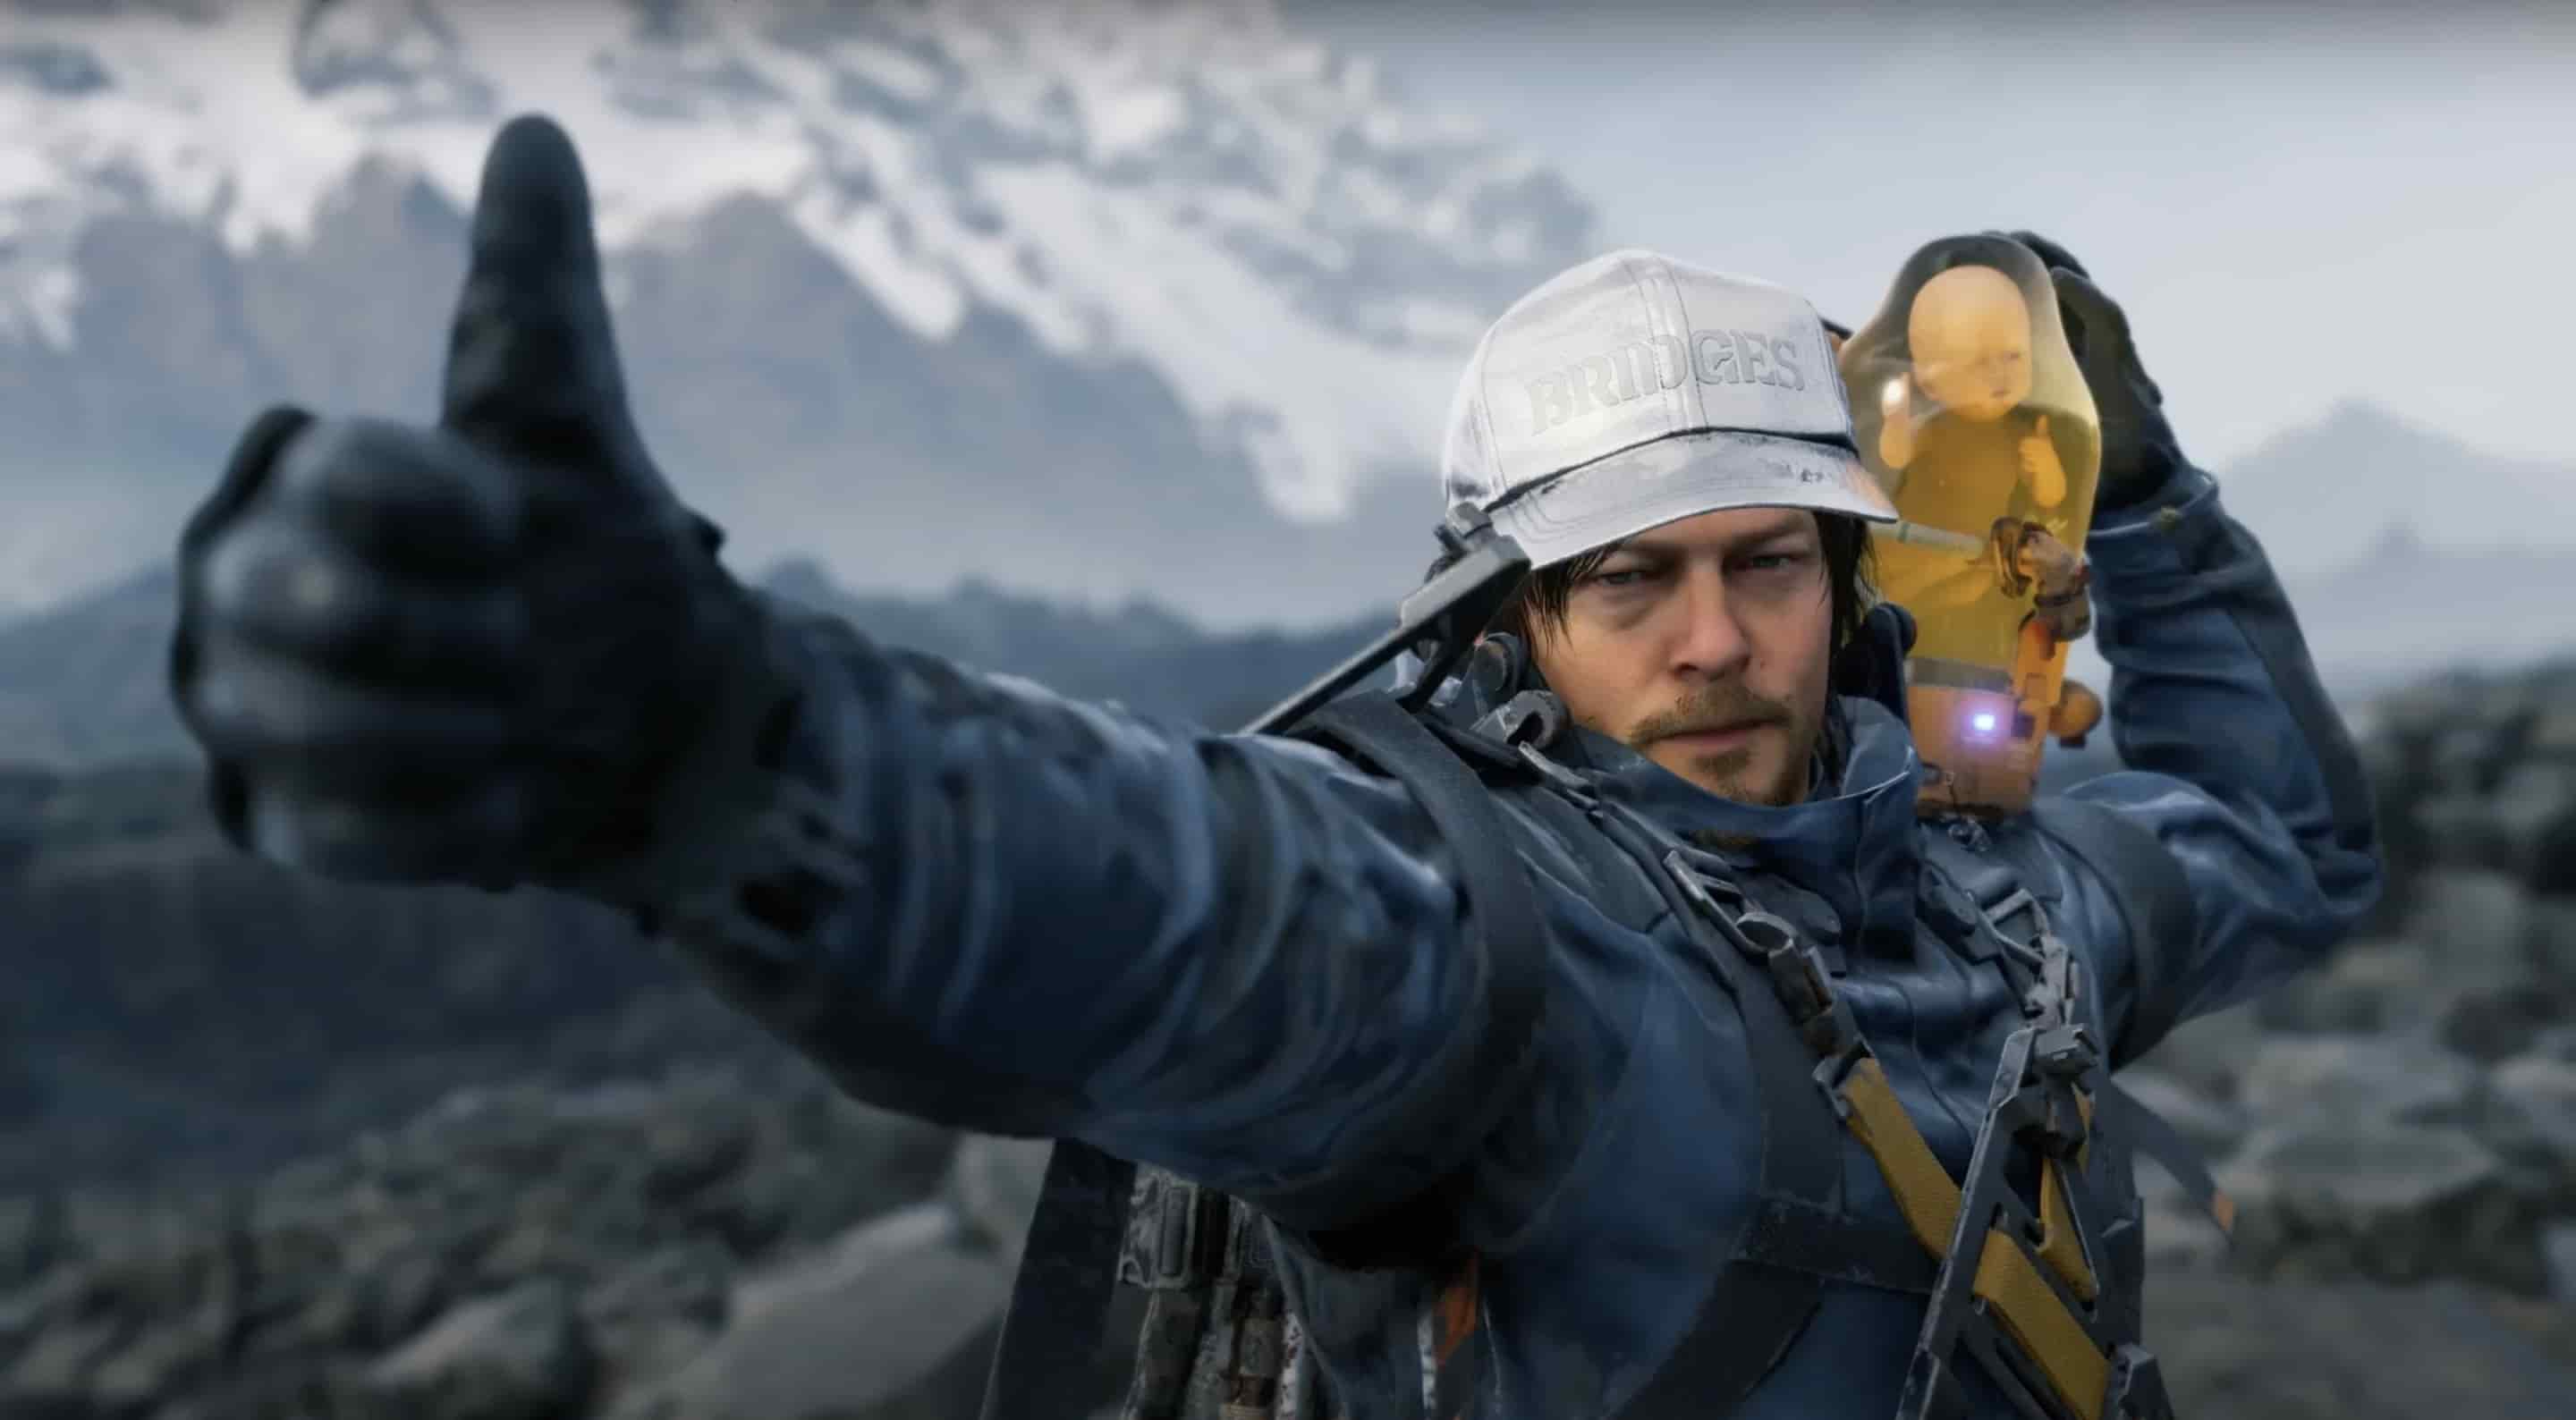 Is anyone else replaying Death Stranding directors cut in quality mode on  the PS5 now VRR is now enabled? : r/DeathStranding